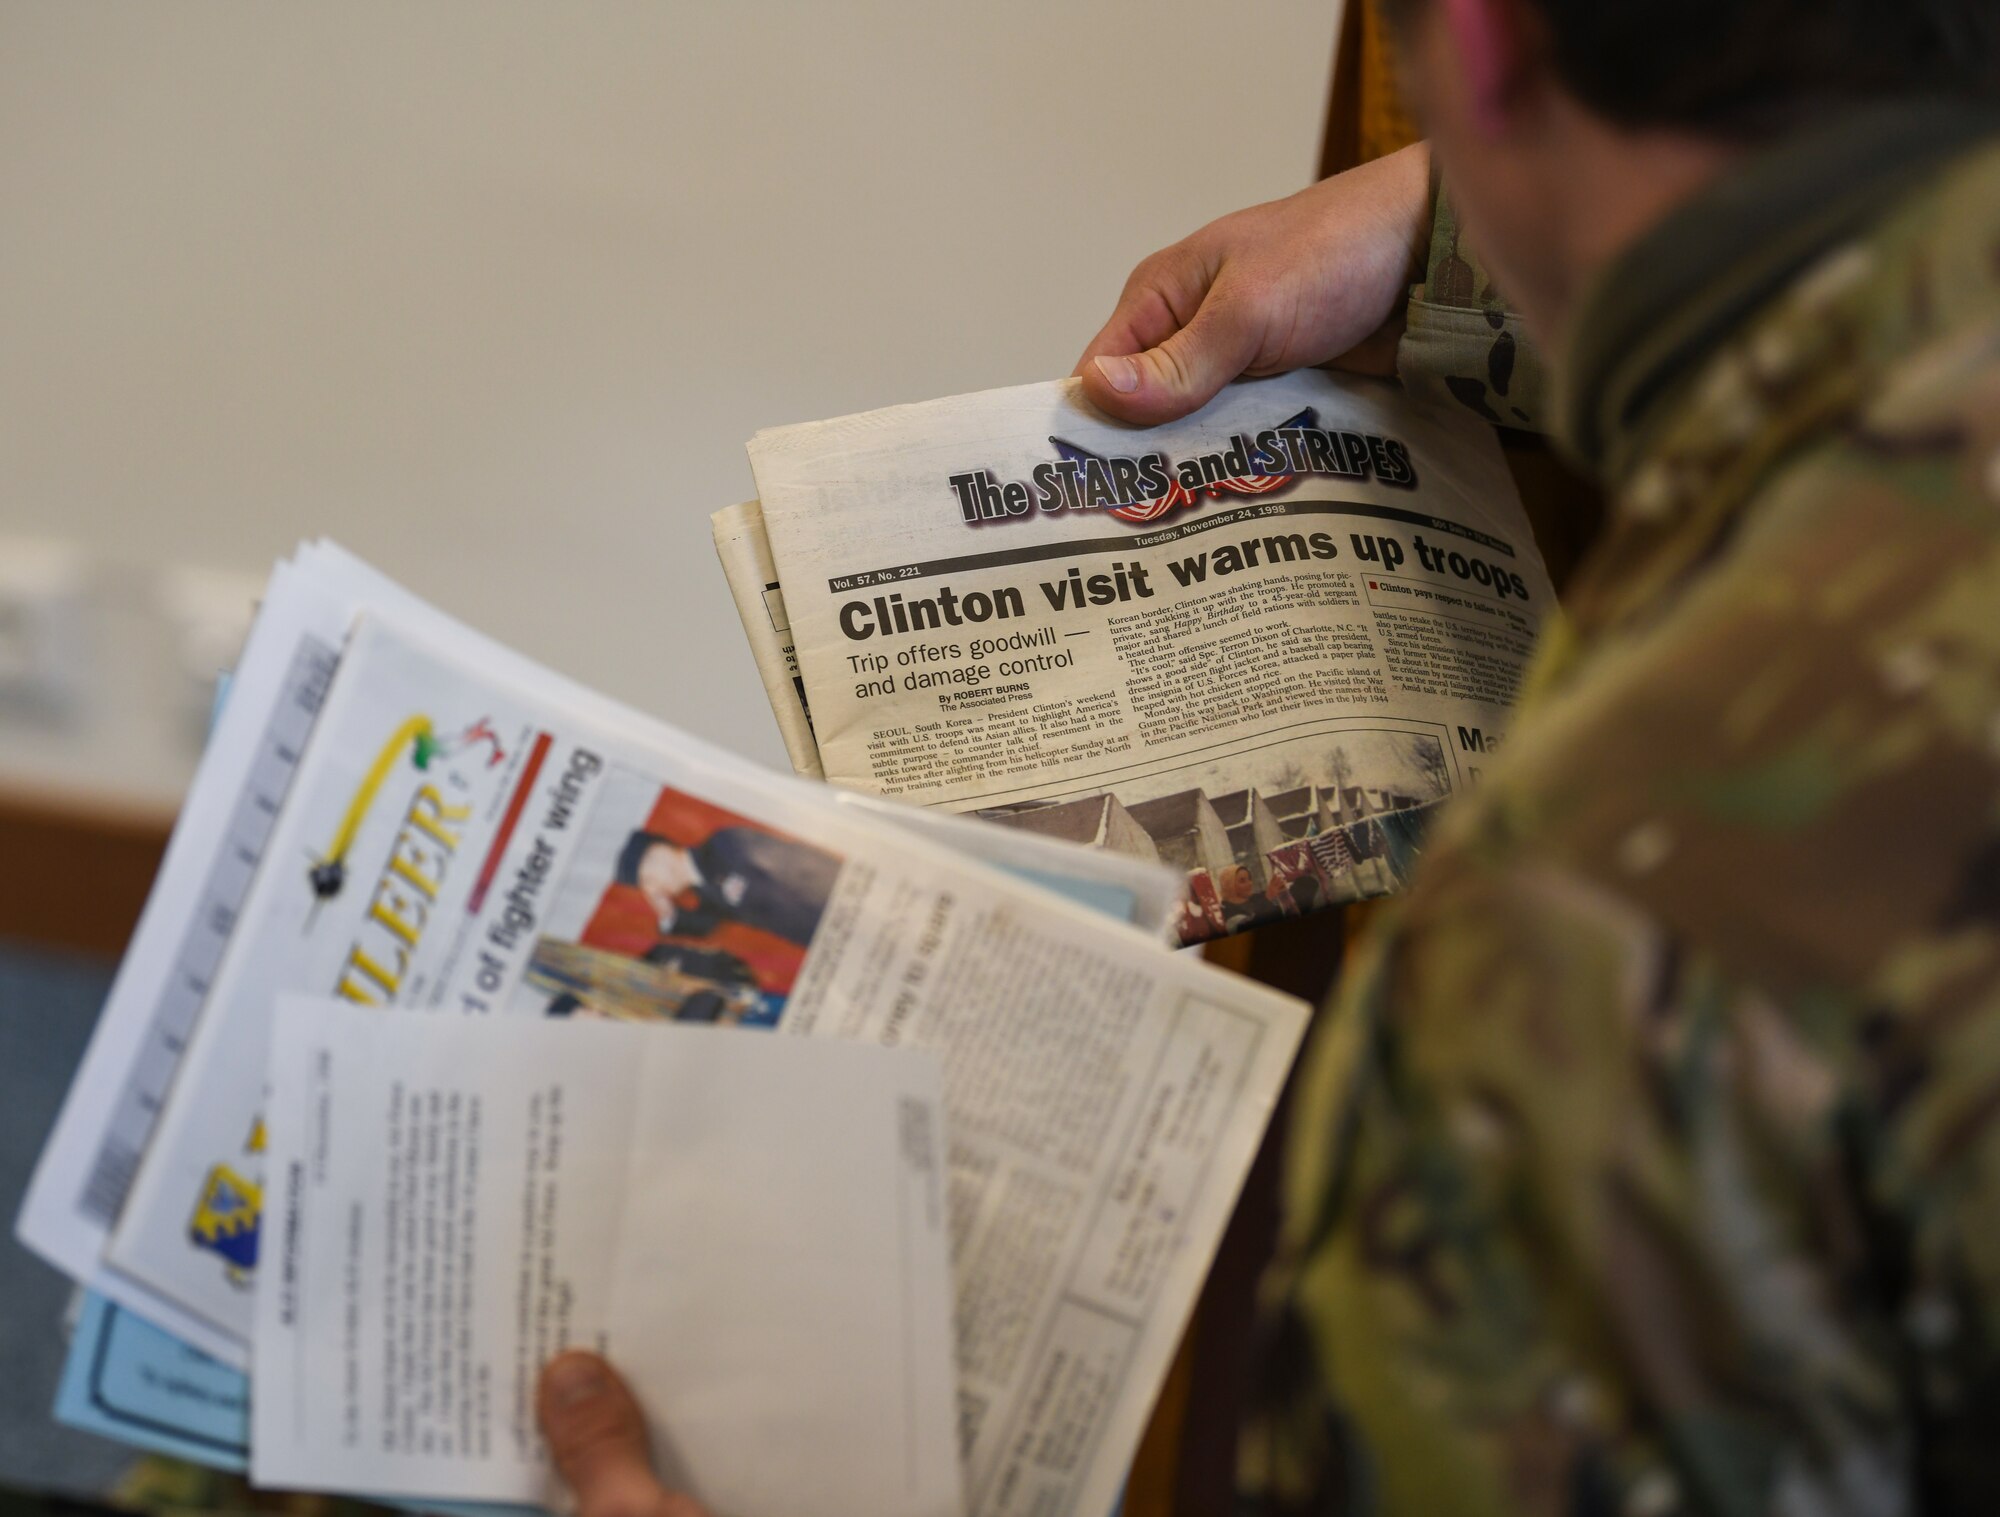 U.S. Air Force Staff Sgt. Michael D. Szydlowski, 57th Rescue Squadron pararescueman, reviews an article from Stars and Stripes dated November 24, 1998 at Aviano Air Base, Italy, May 15, 2020. The capsule was constructed by the class of 99-A Aviano Airman Leadership School. (U.S. Air Force photo by Airman 1st Class Ericka A. Woolever)